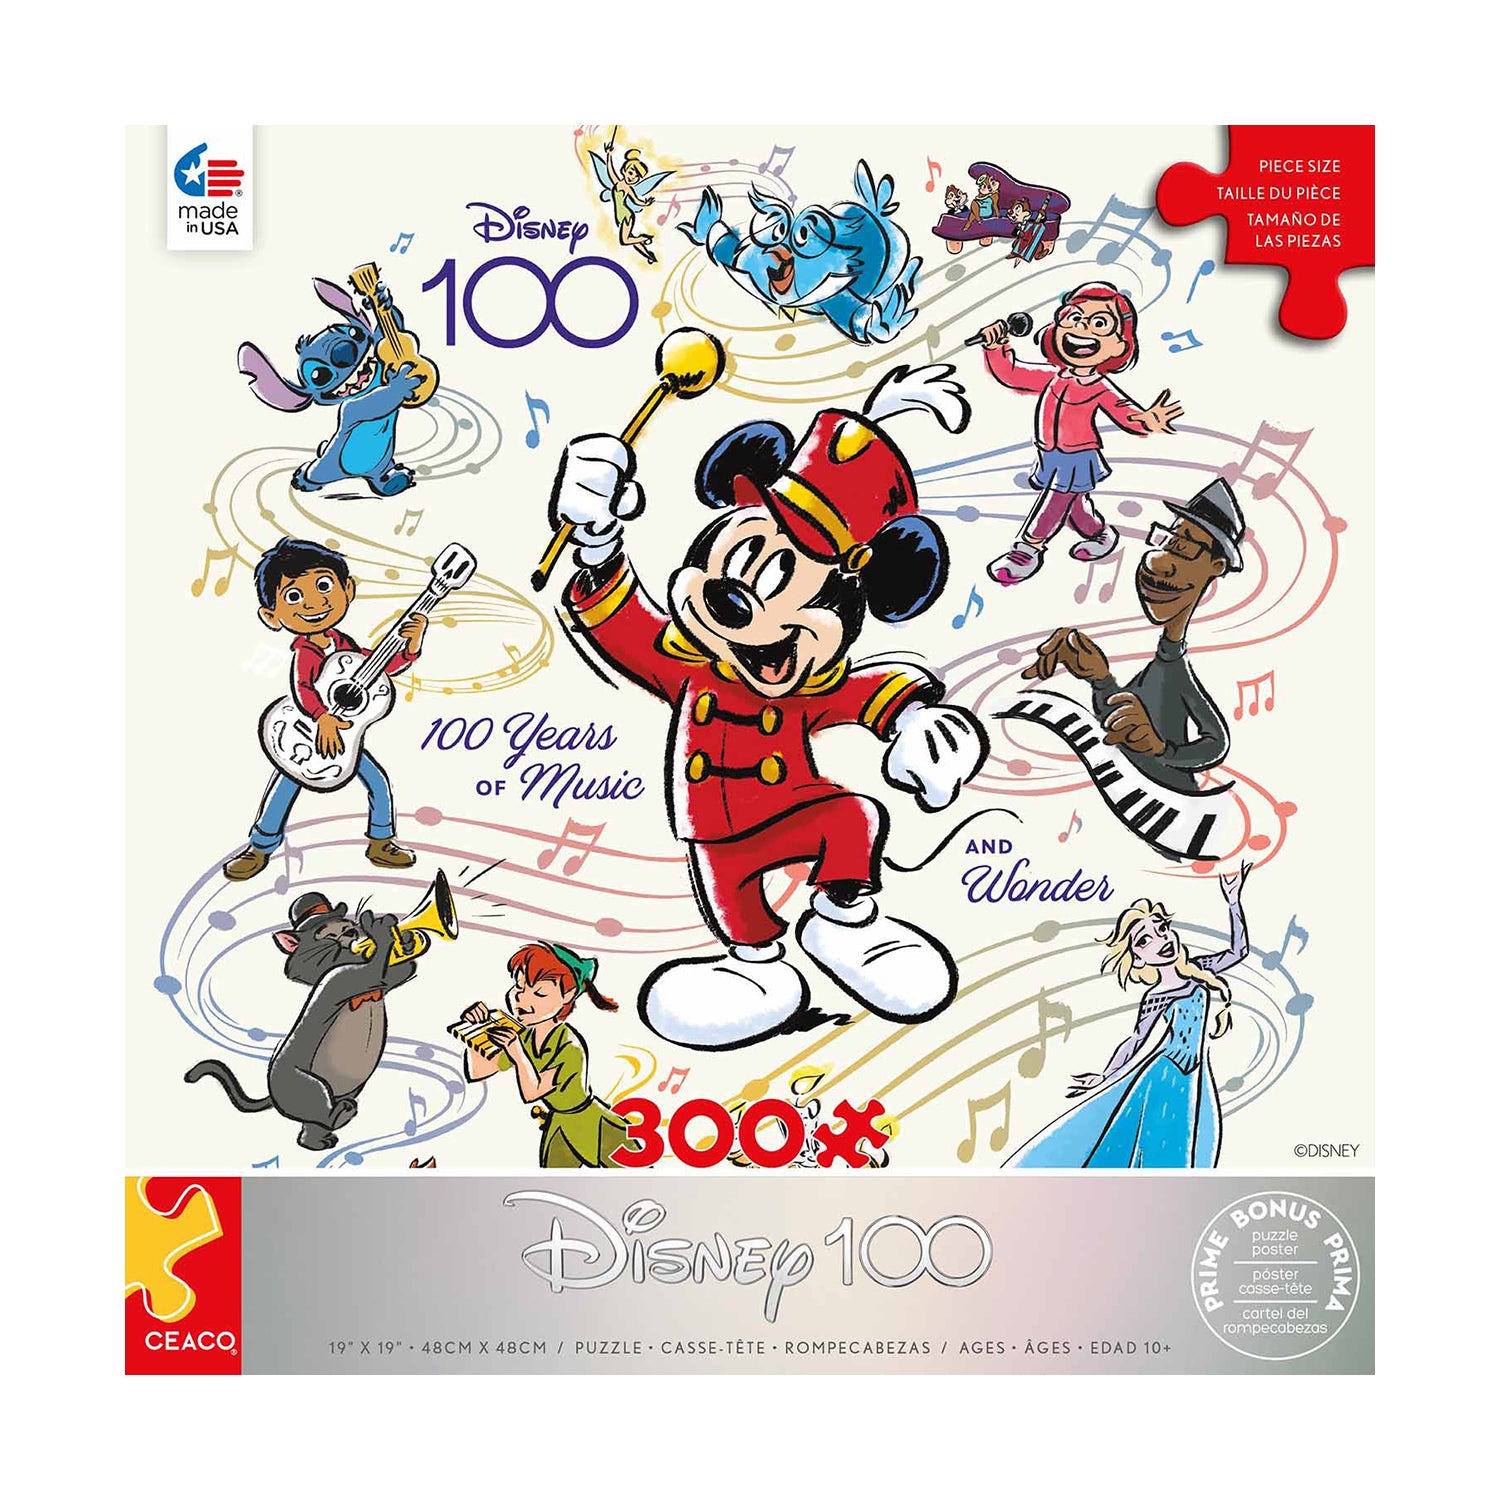 Ceaco Disney 100 - 100 Years of Music 300 Piece Puzzle